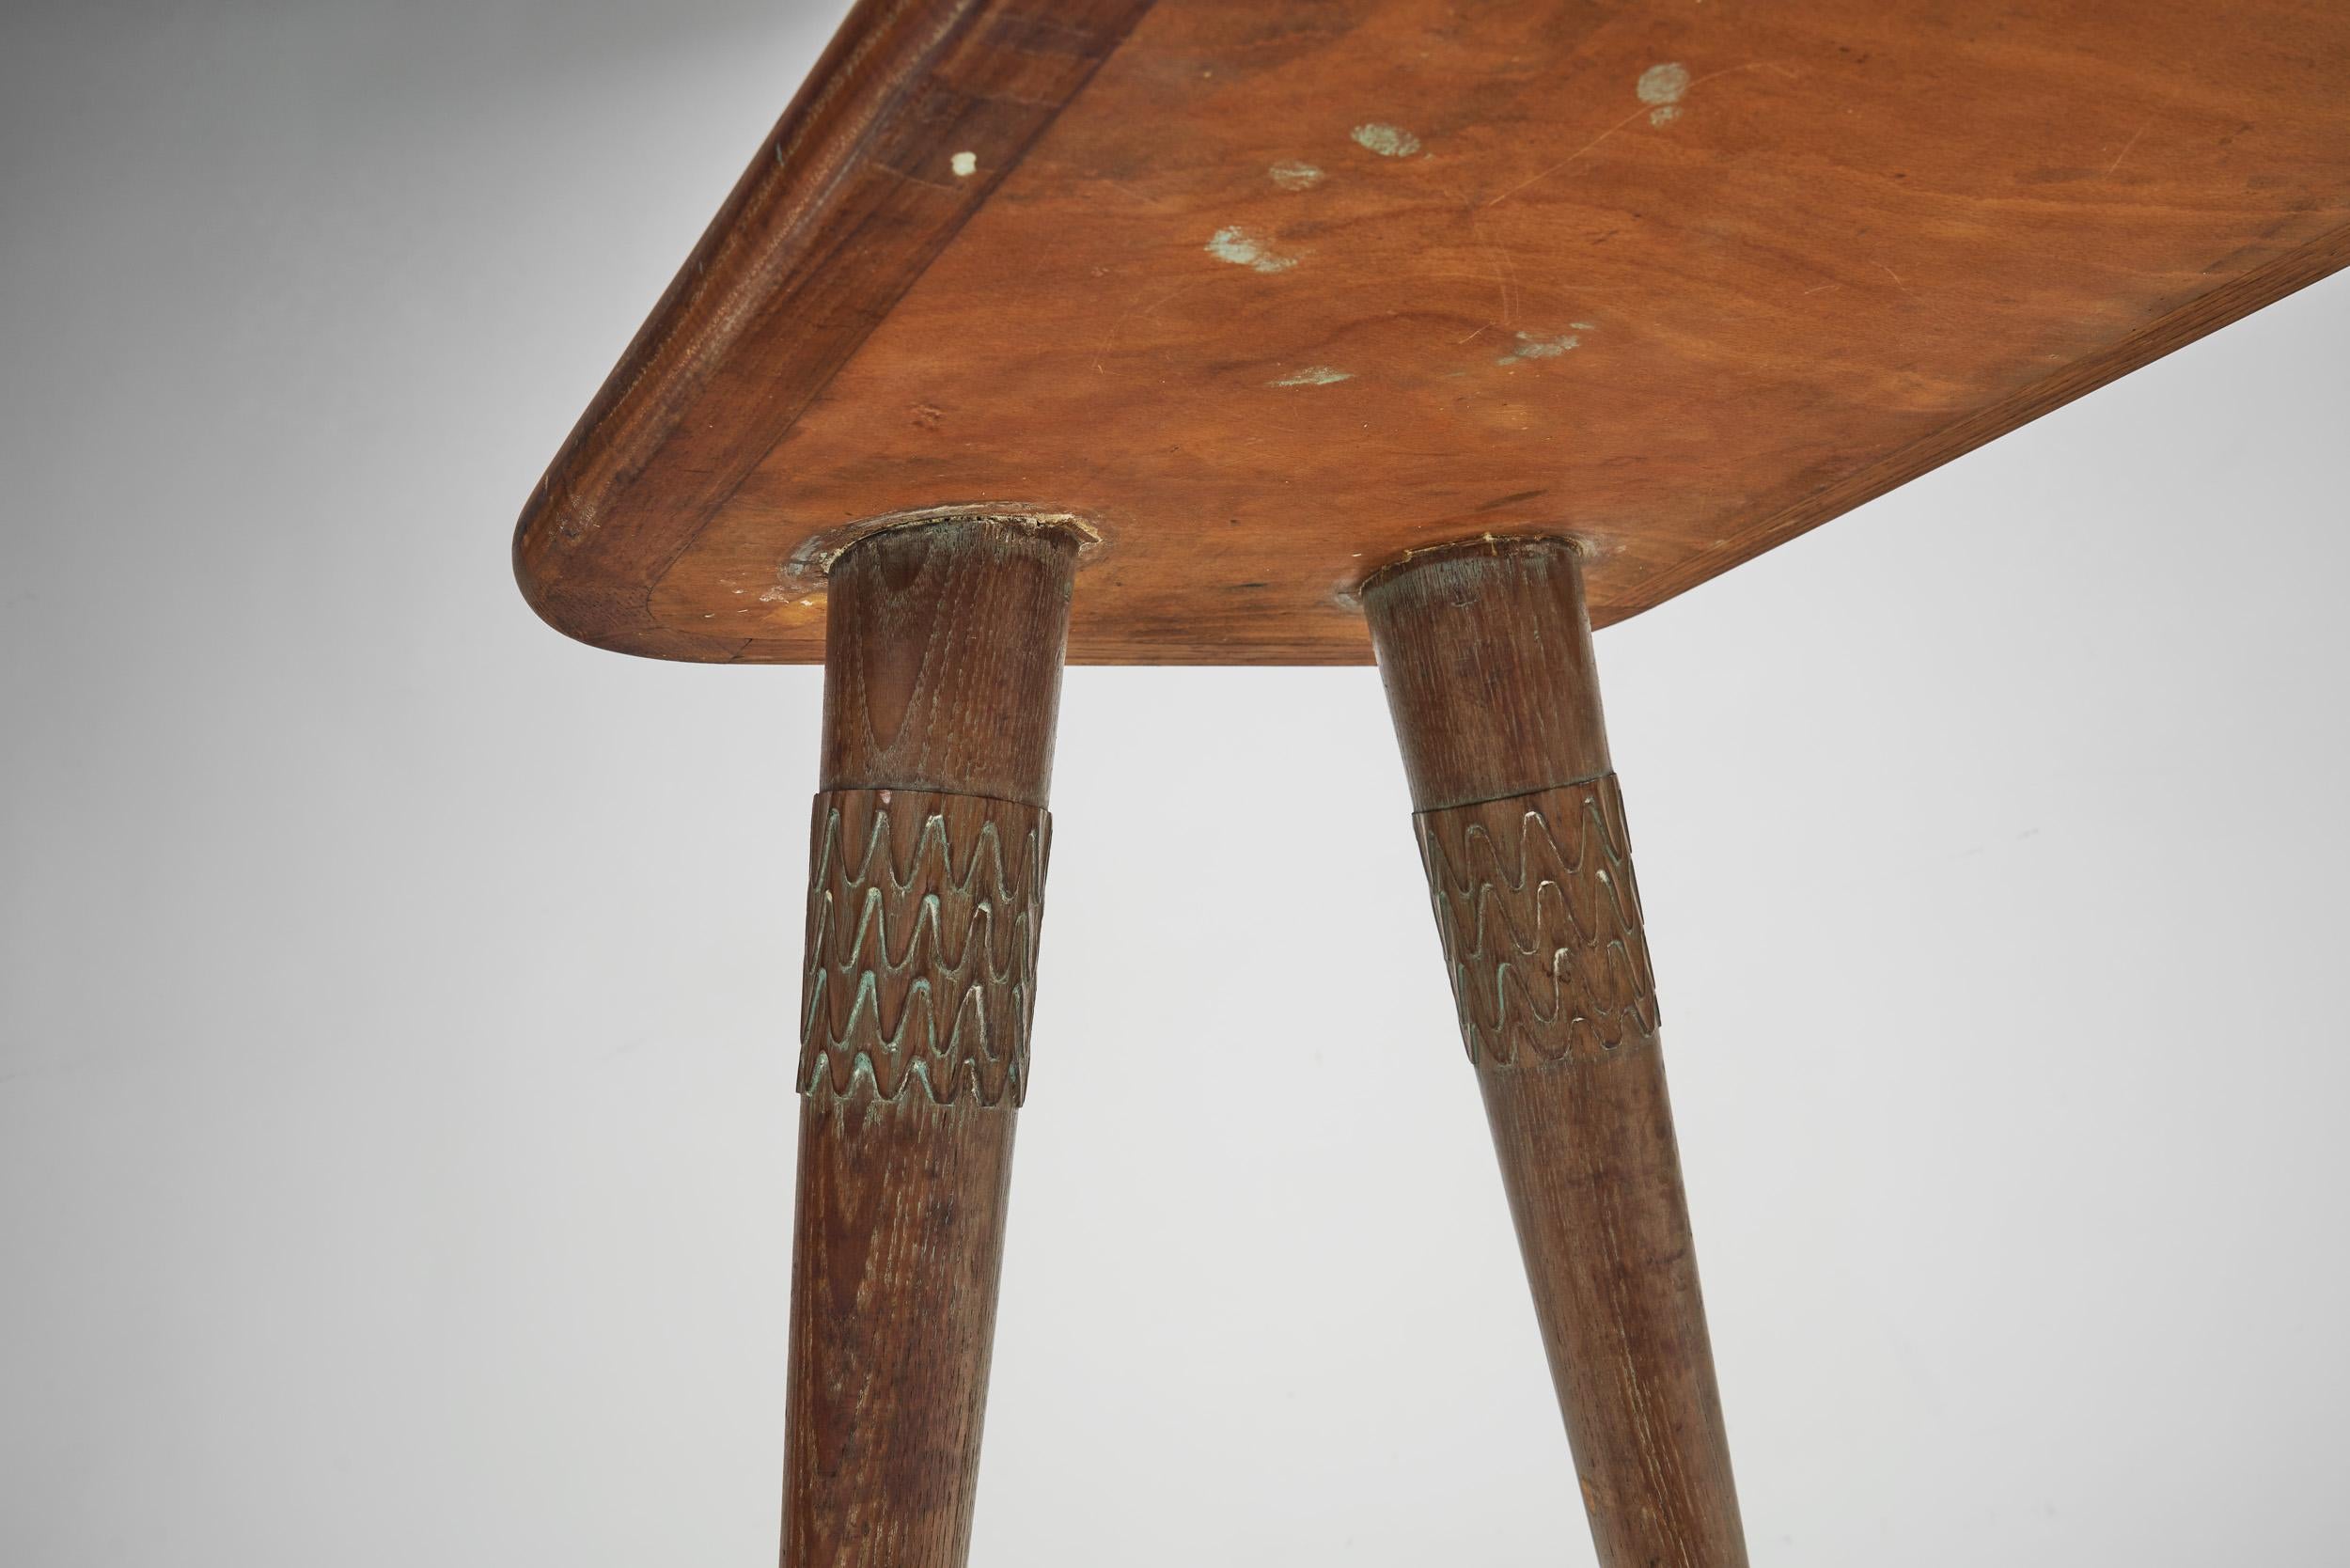 Artisan Wood Side Table with Decorative Carved Legs, Europe 1950s For Sale 9